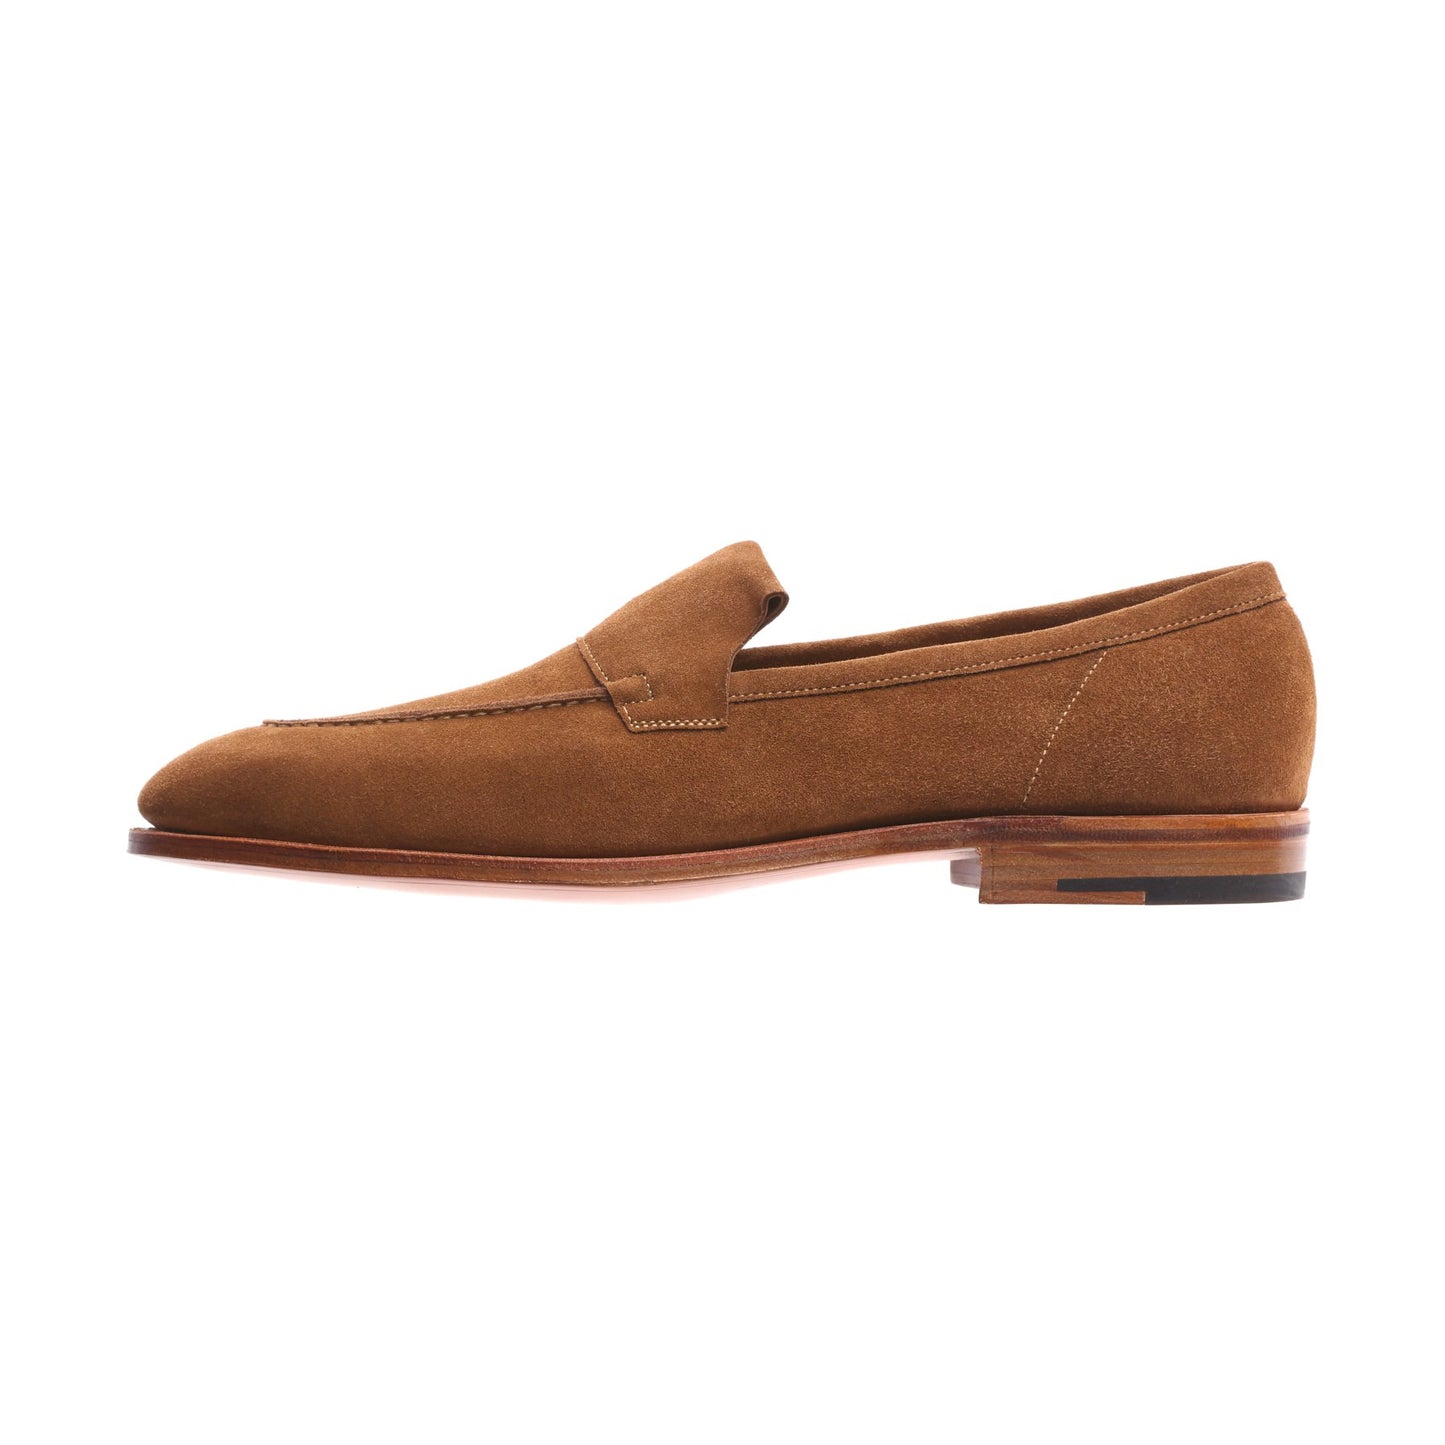 John Lobb "Aley" Suede Loafer with Hand-Stitched Apron in Brown - SARTALE